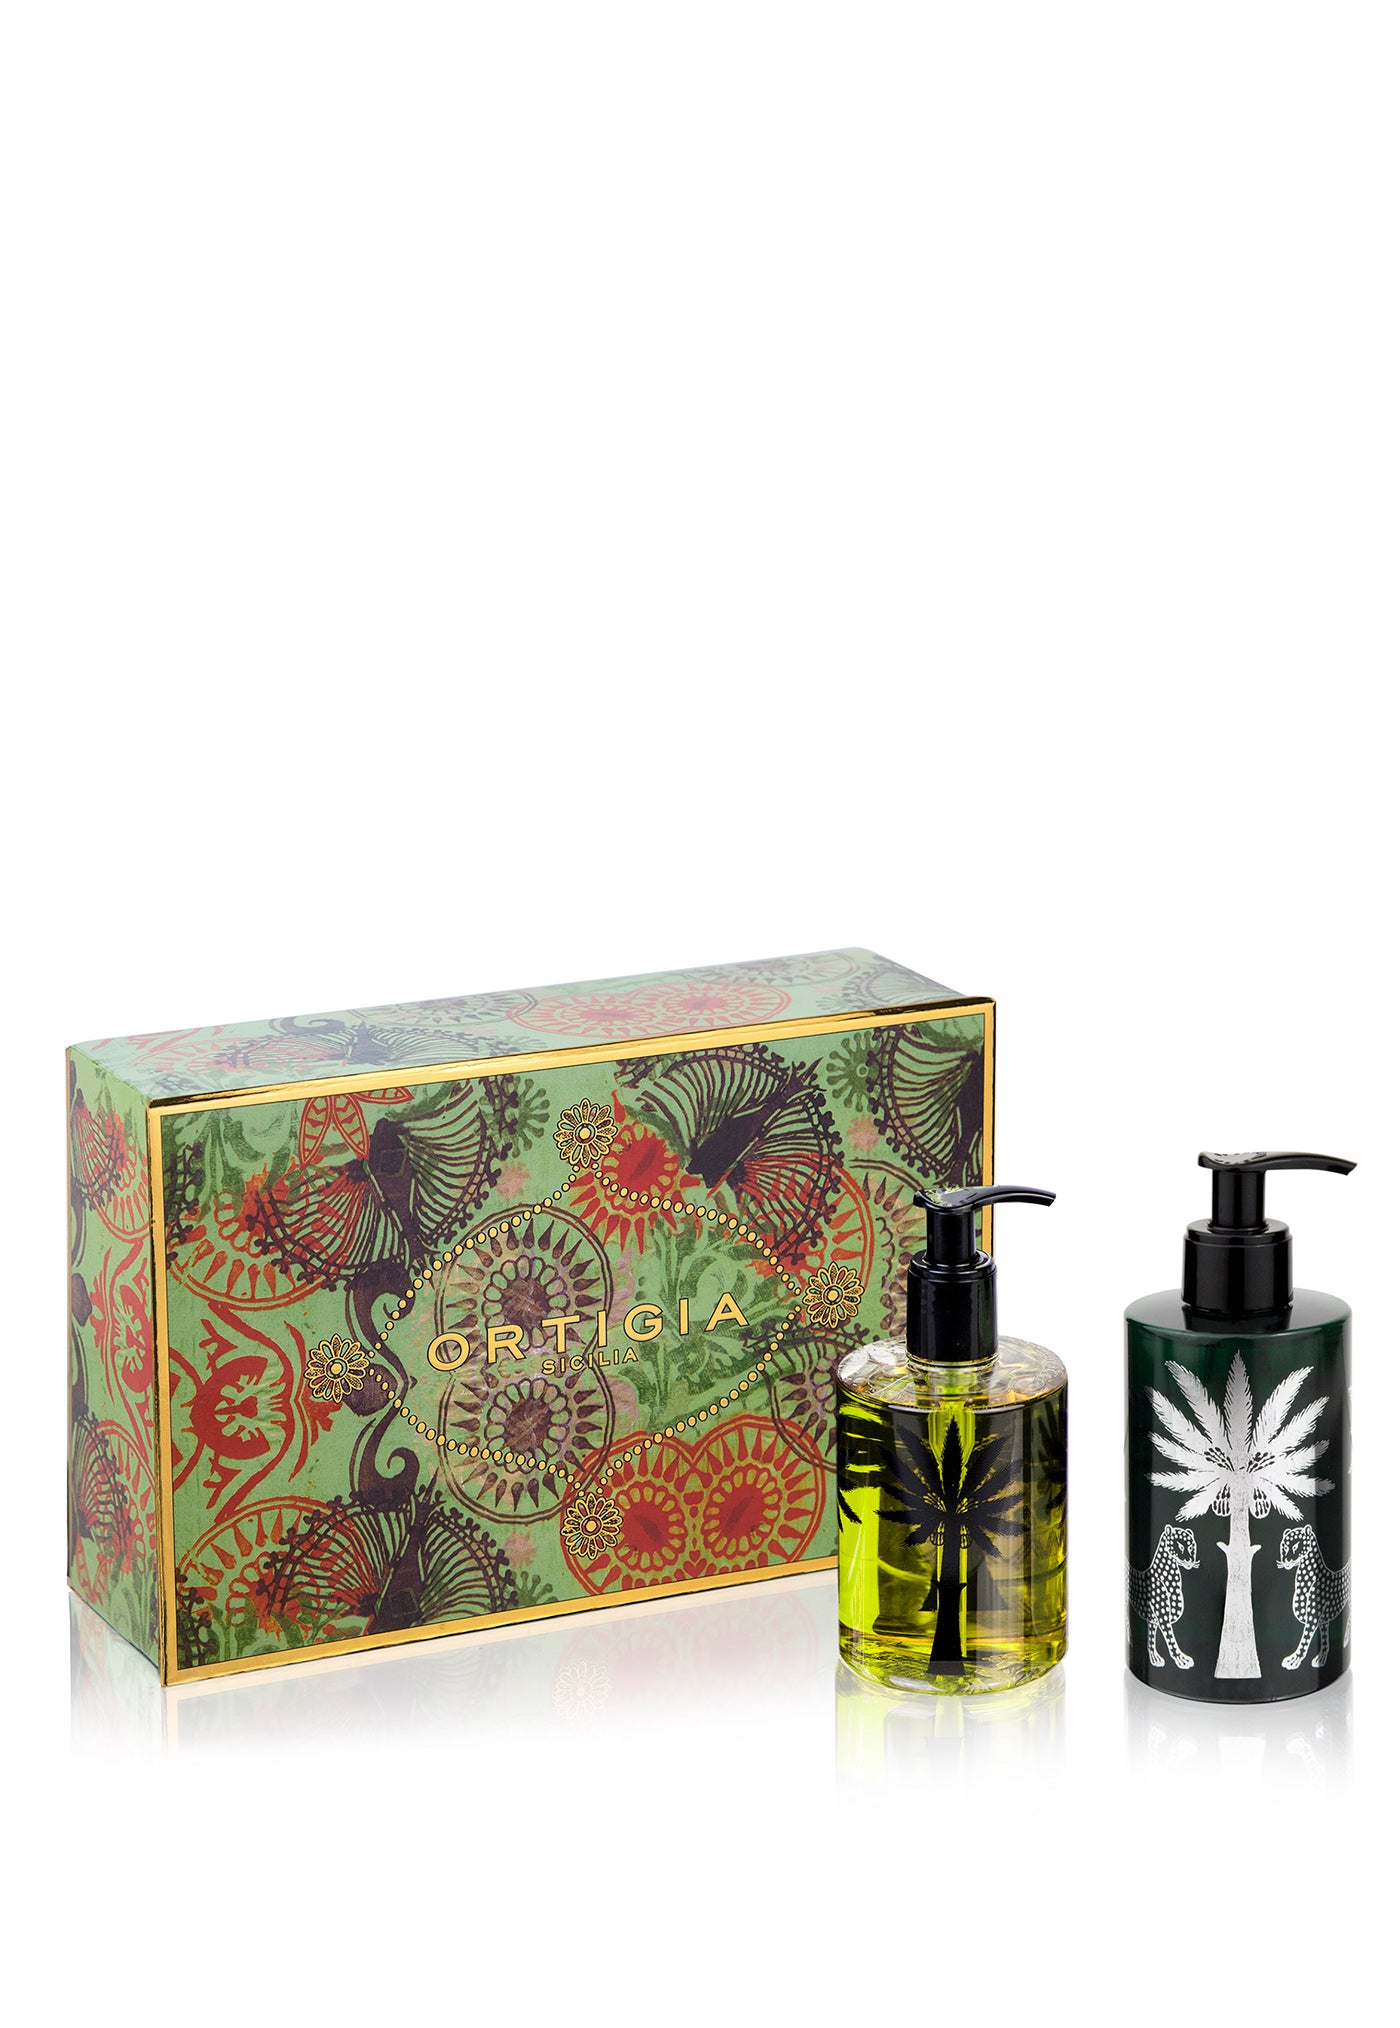 Fico D'India Liquid Soap & Body Cream Gift Set sold by Angel Divine